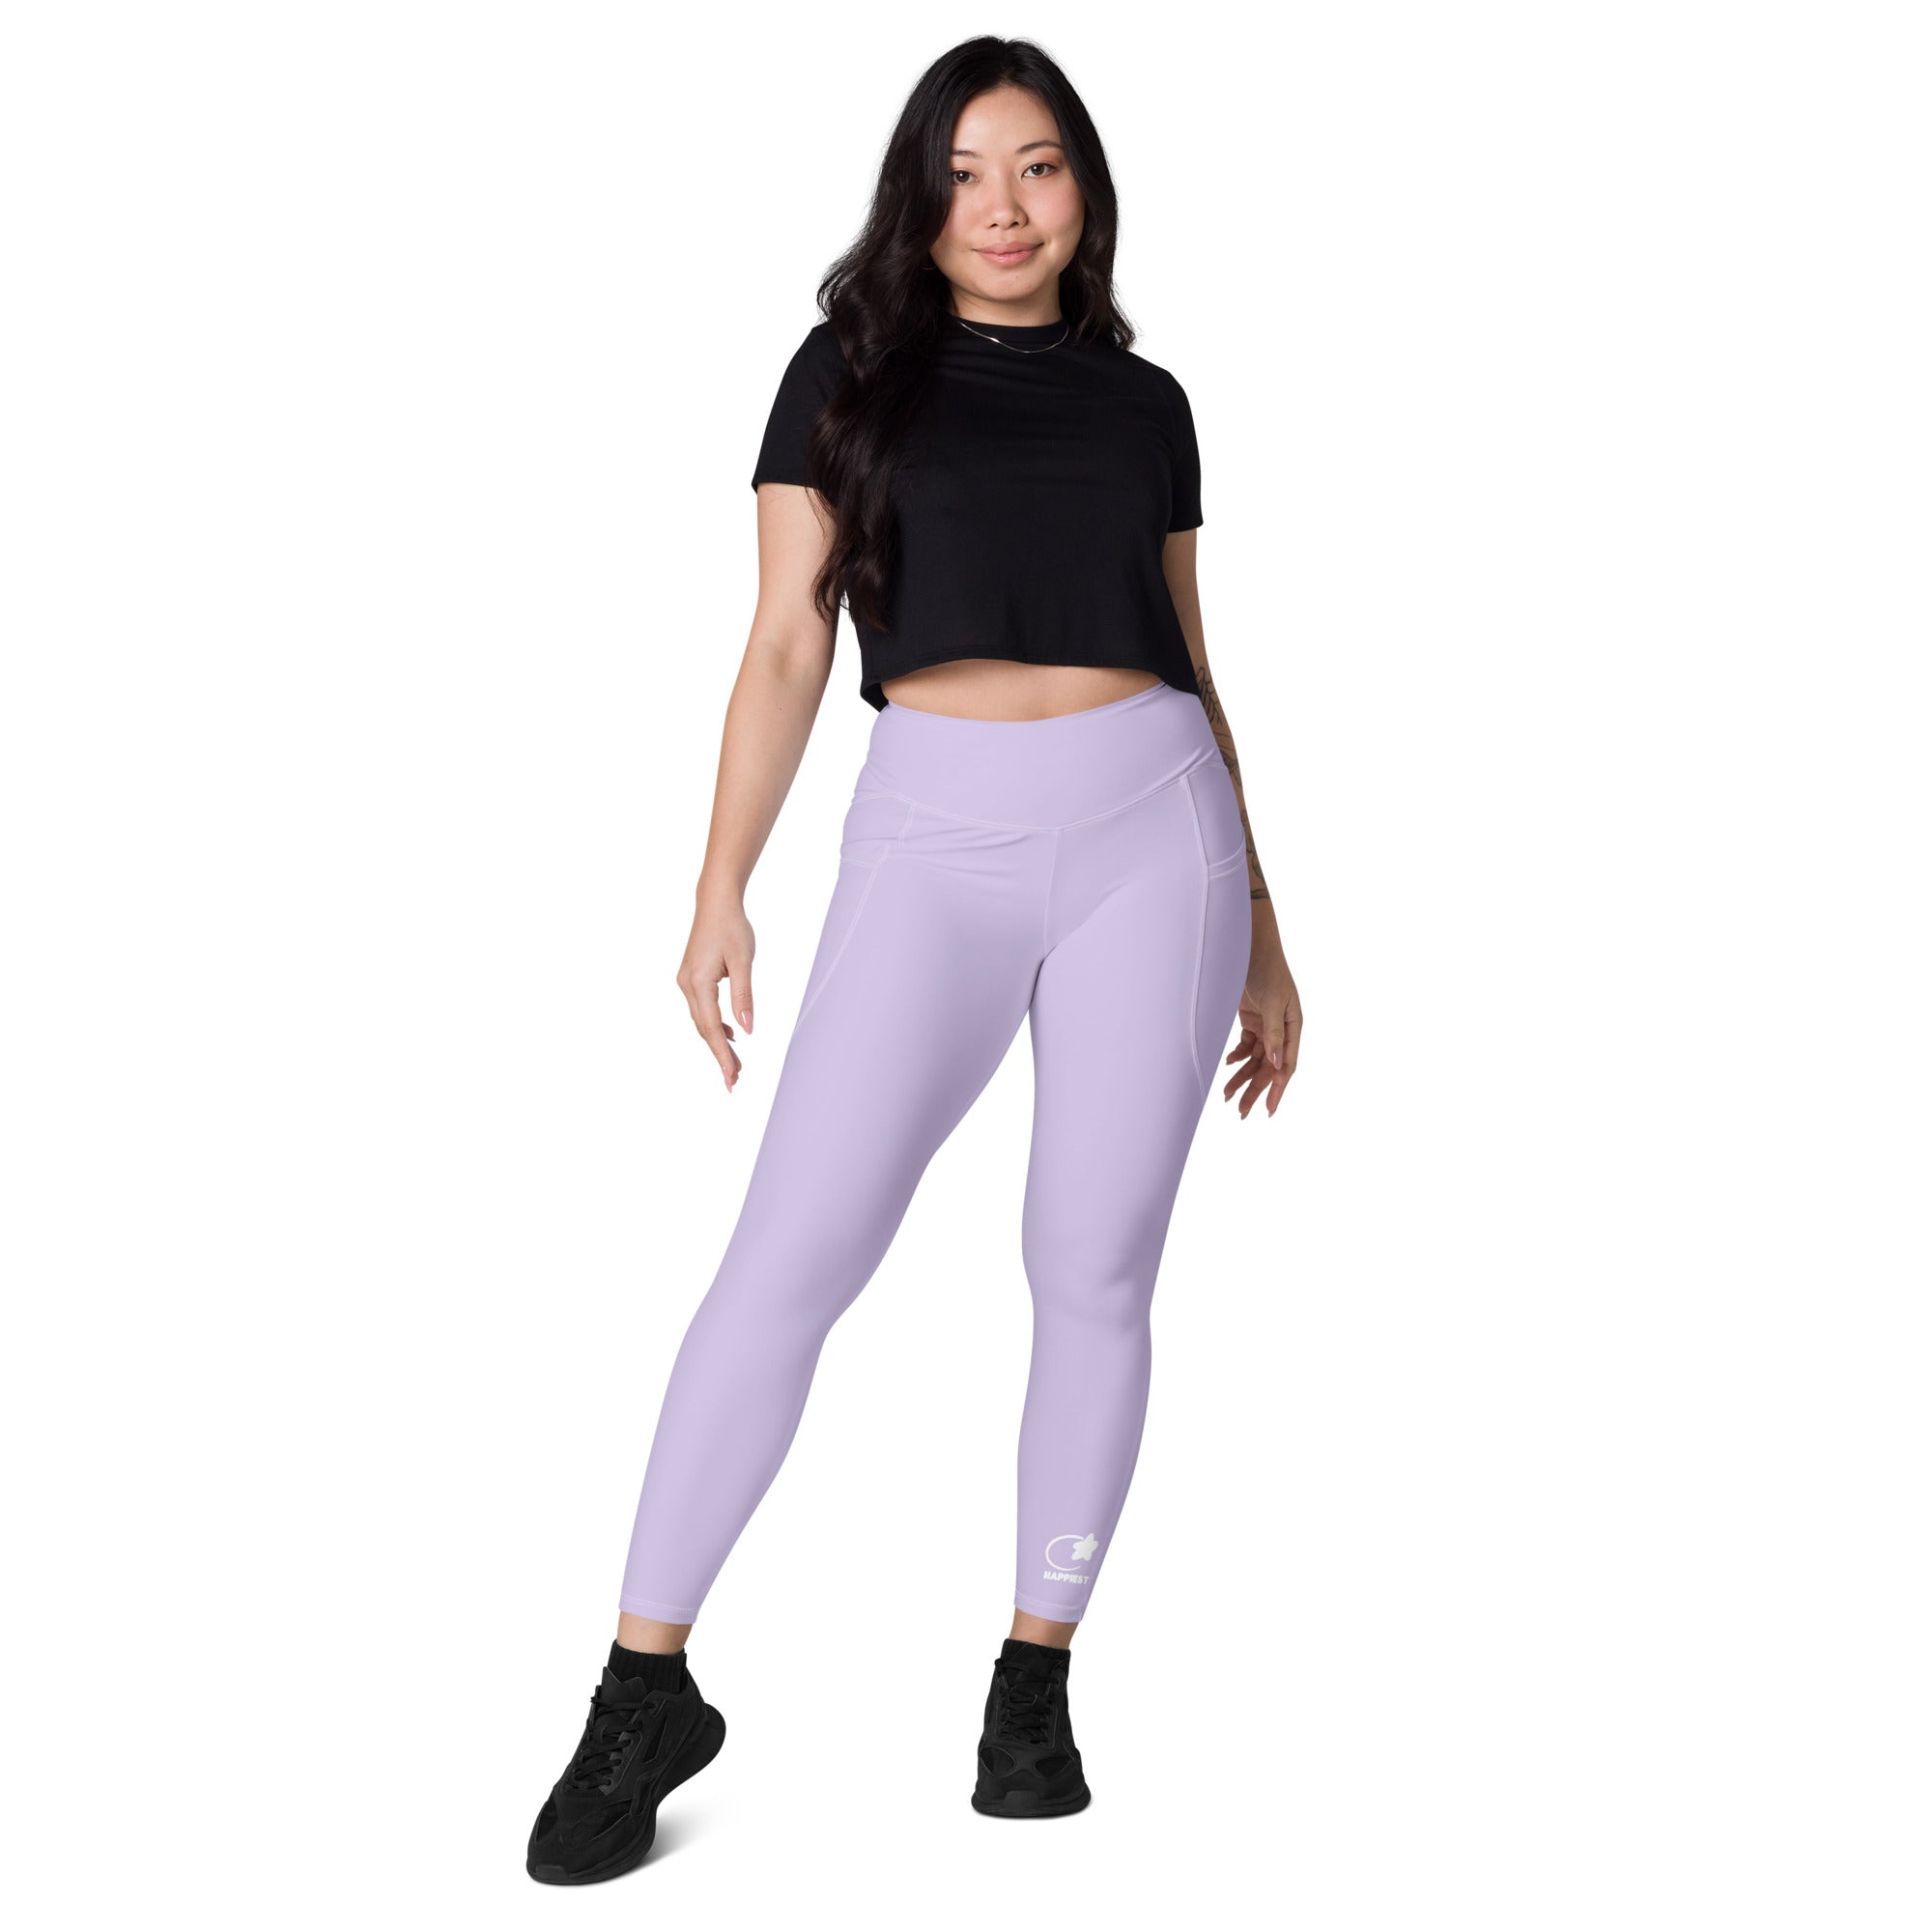 Lavender Leggings with pockets